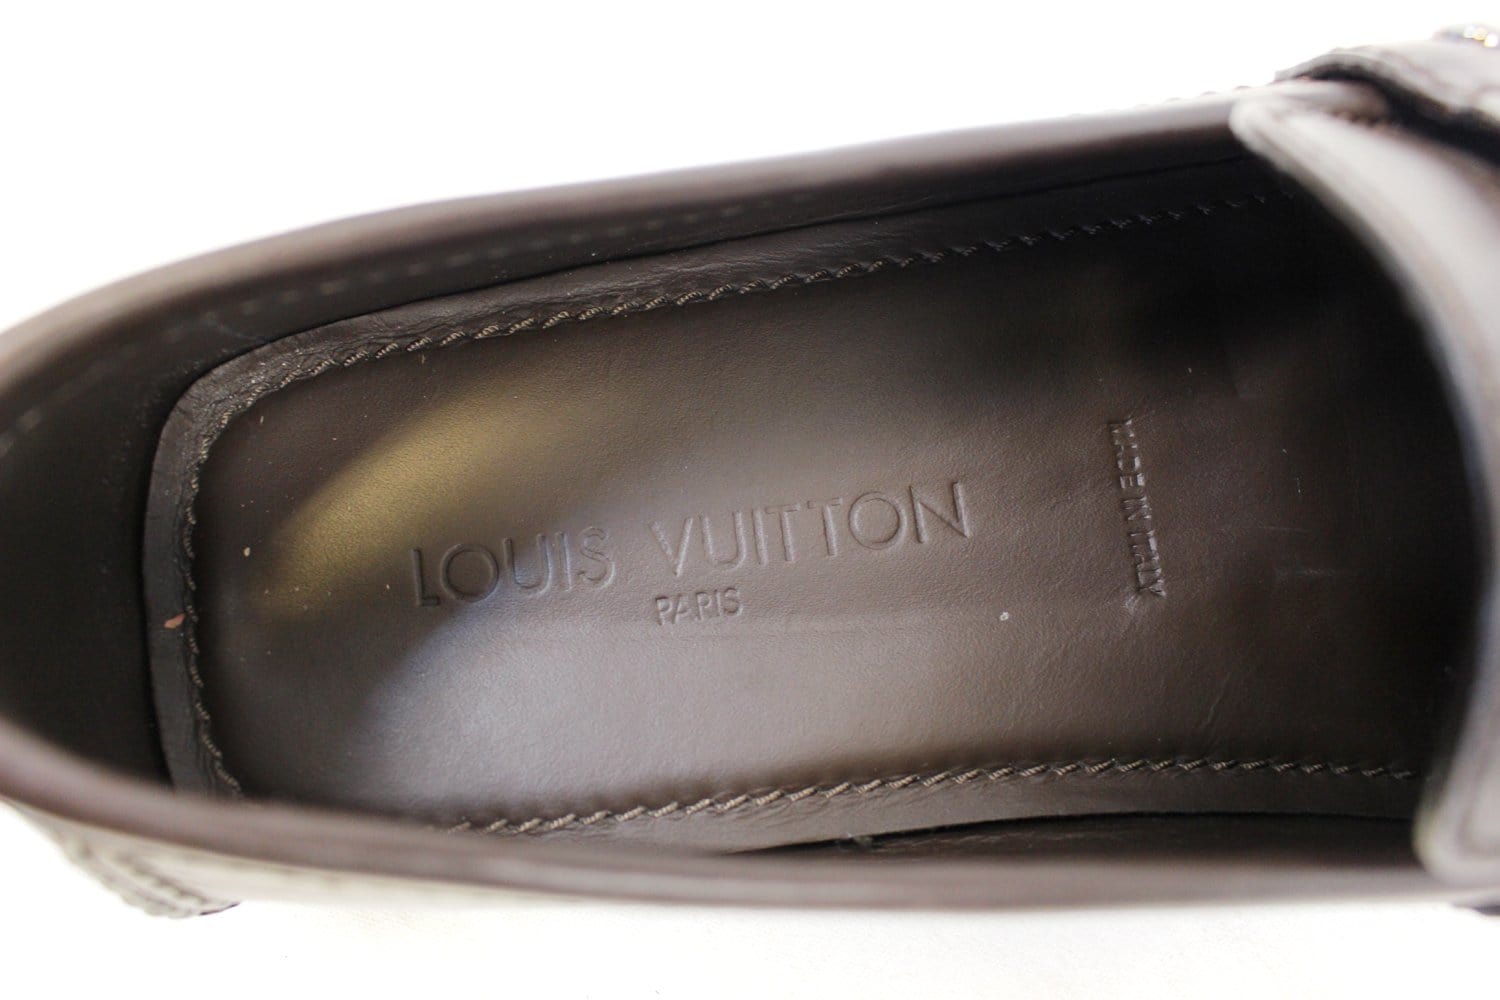 Louis Vuitton major loafer, traditional. Size 9 LV, equivalent to a size 10  US